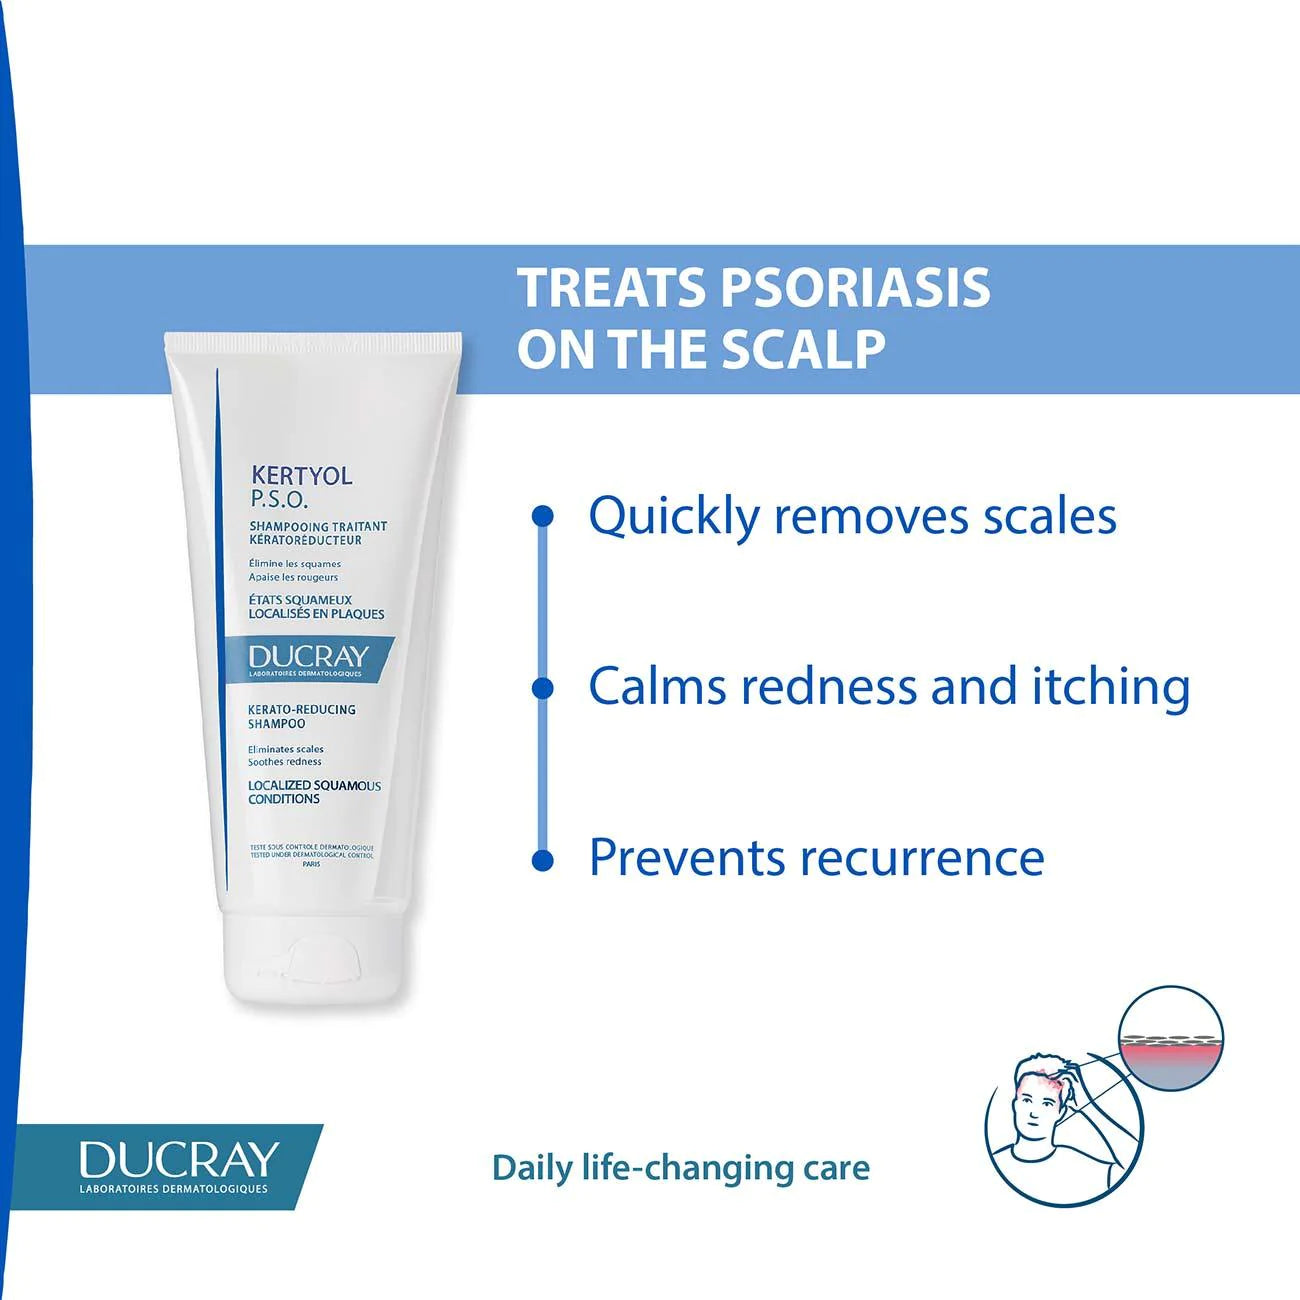 DUCRAY Kertyol P.S.O Kerato-Reducing Shampoo - Localized Squamous Conditions